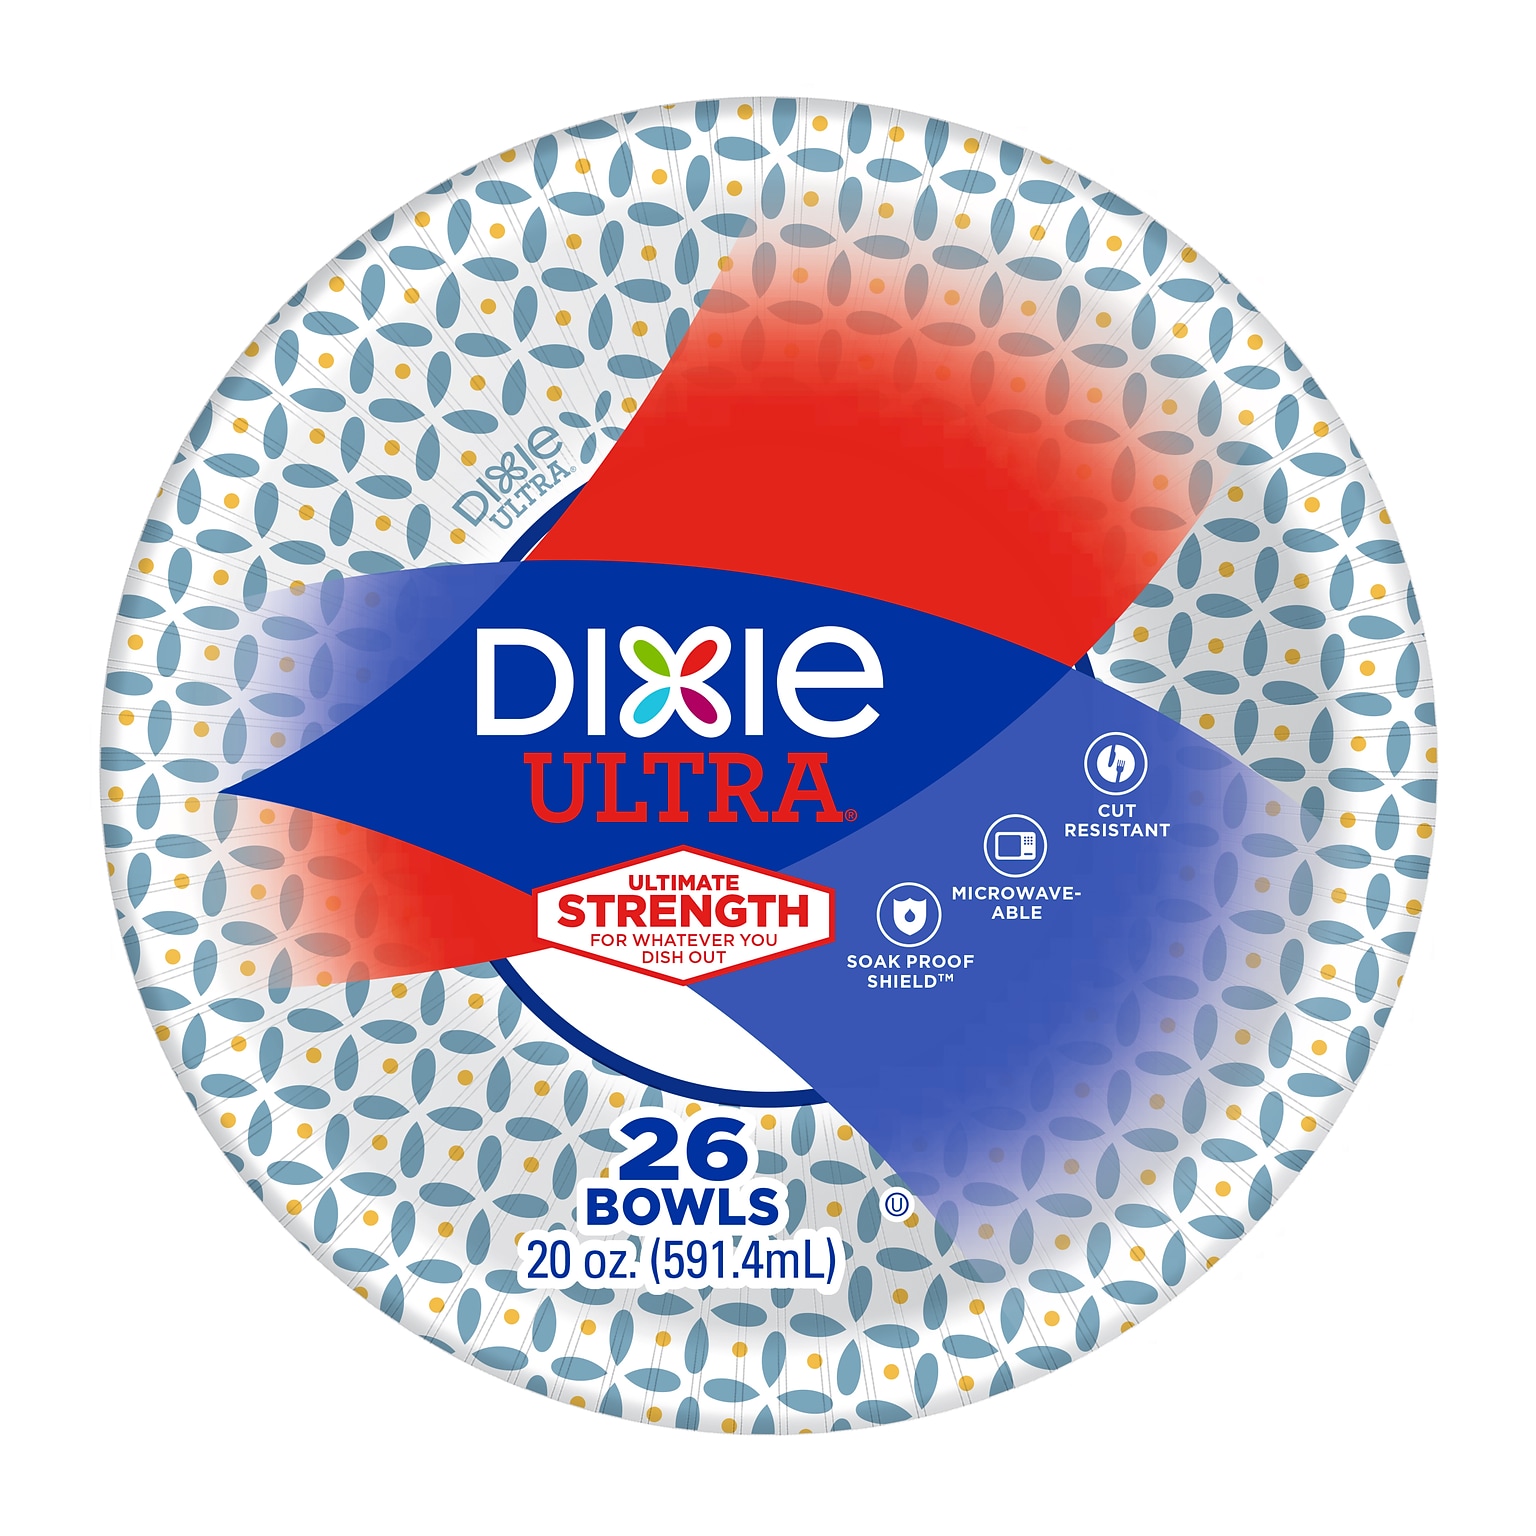 Dixie Ultra® Soak Proof Shield 20 Ounce Capacity Paper Bowl, Pack of 26 (15259)